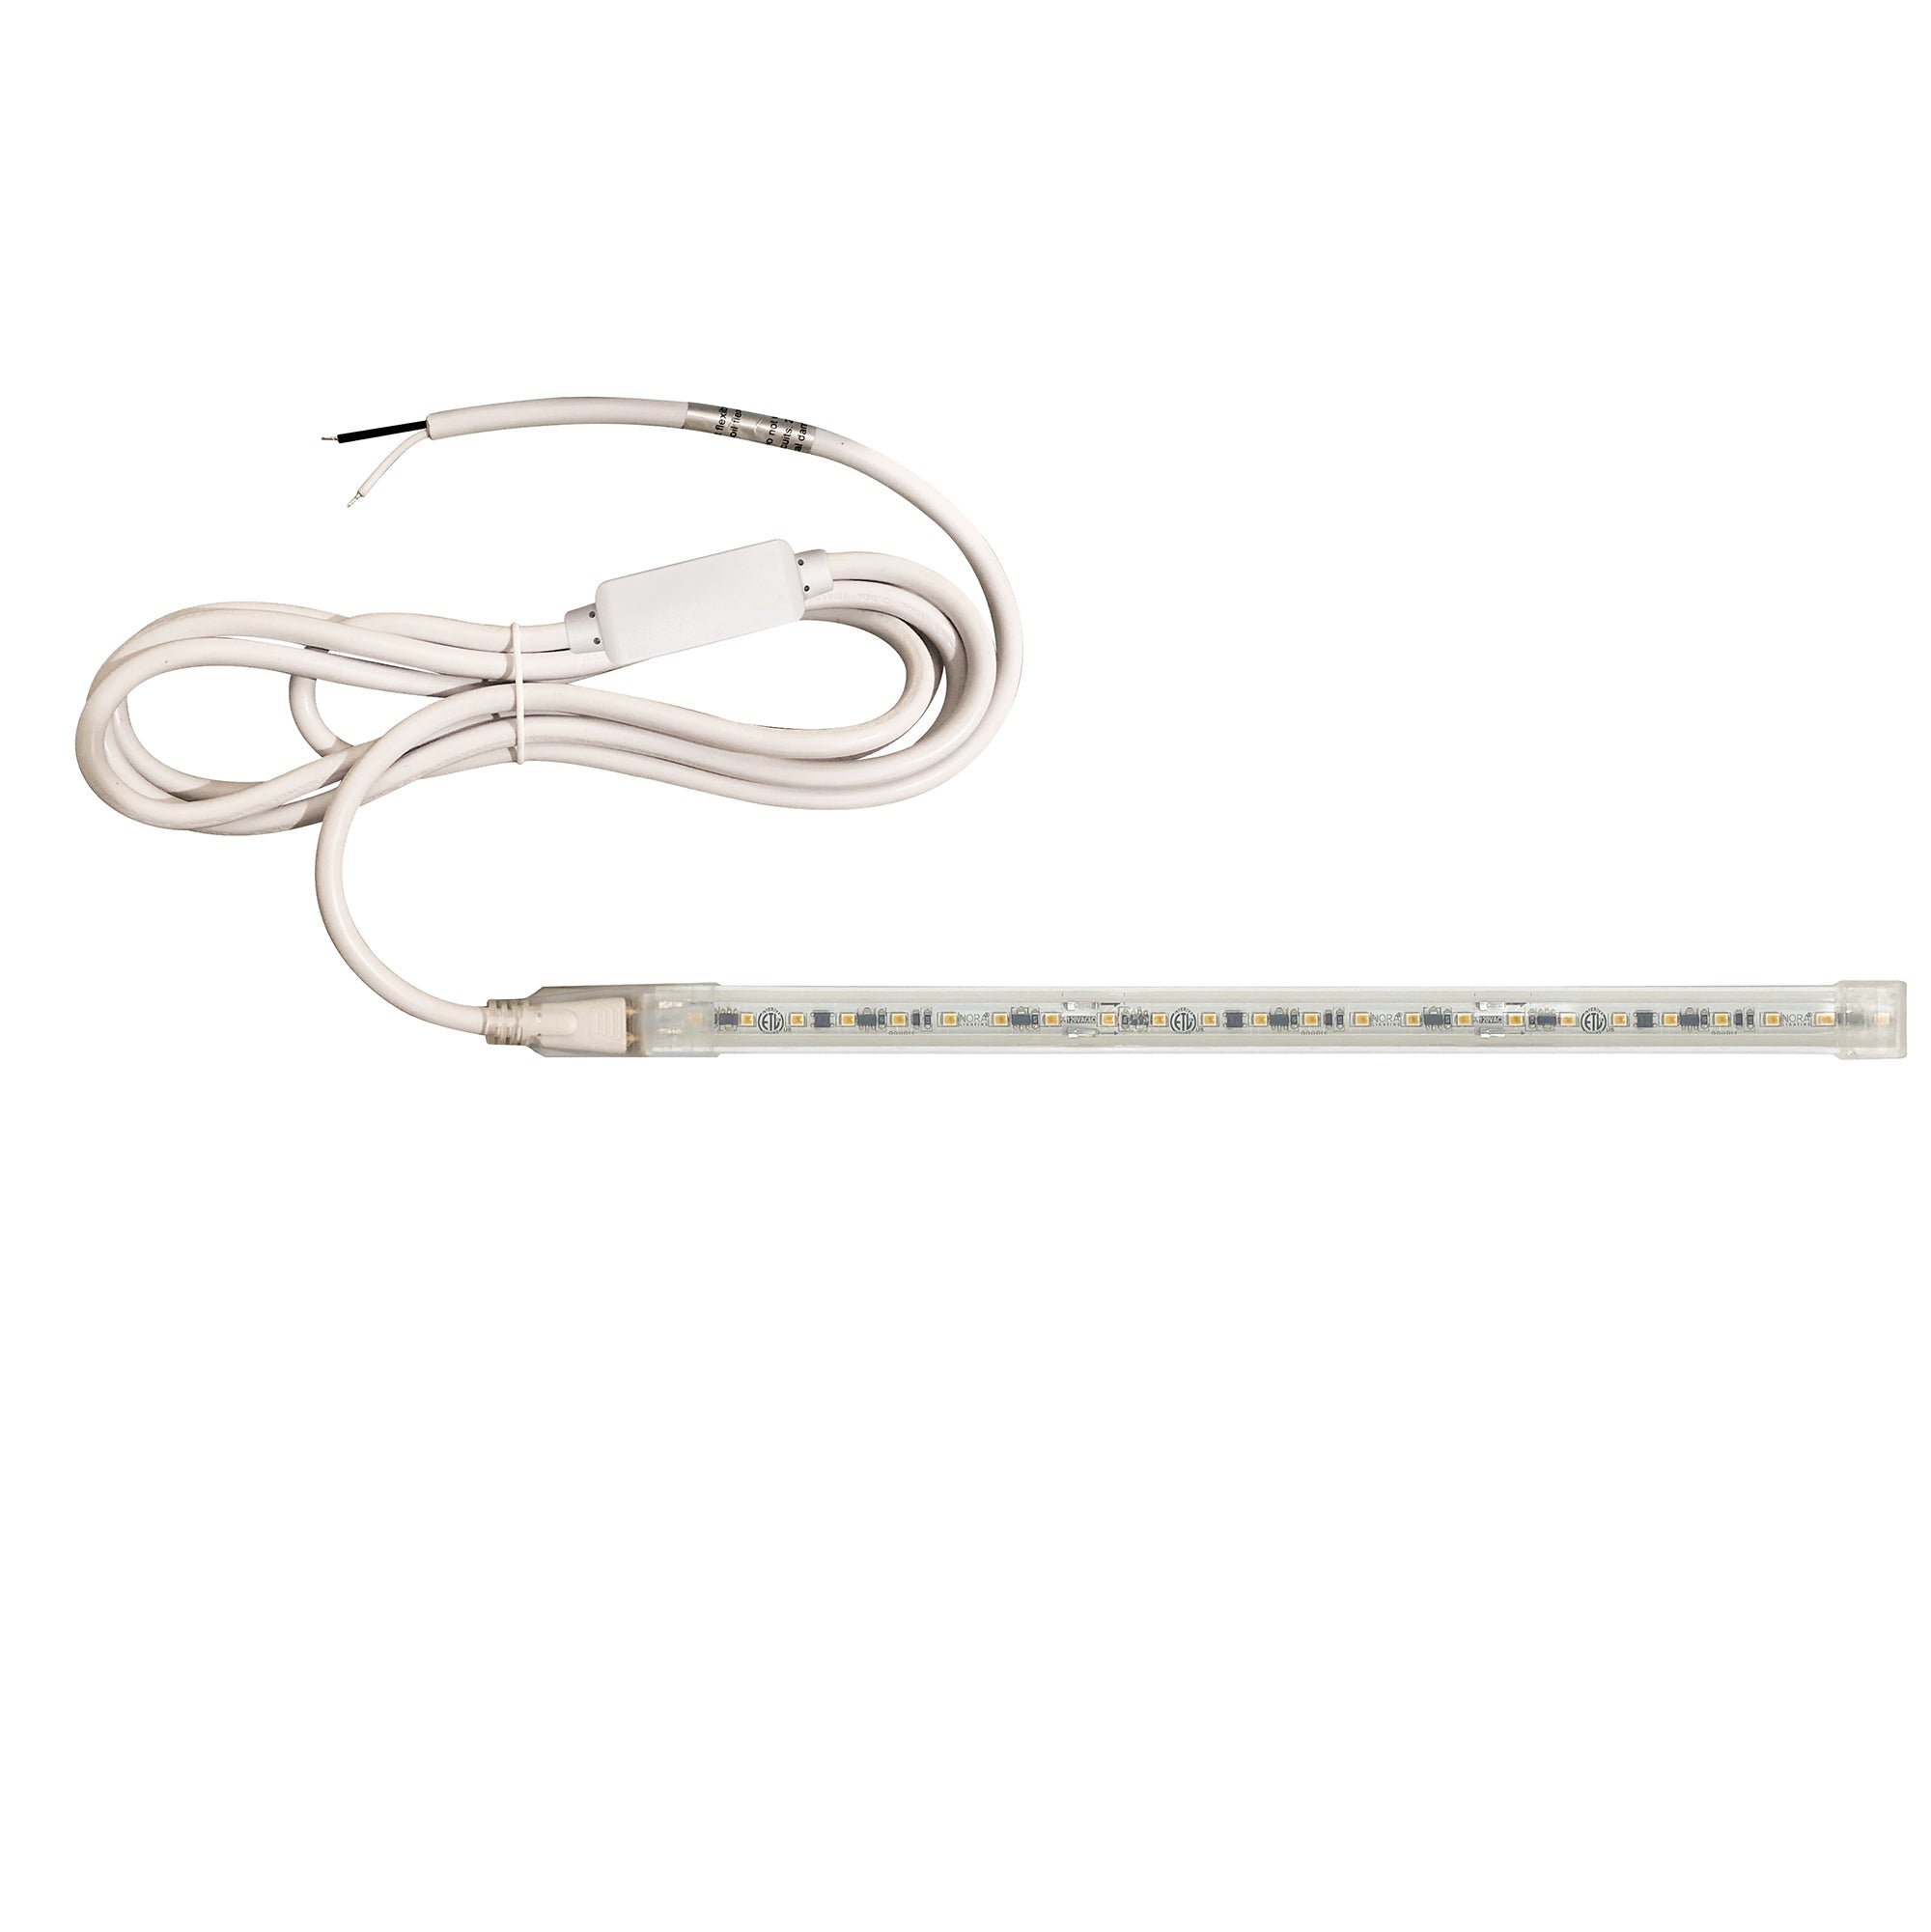 Nora Lighting NUTP13-W100-12-940/HWSP - Accent / Undercabinet - Custom Cut 100-ft 120V Continuous LED Tape Light, 330lm / 3.6W per foot, 4000K, w/ Mounting Clips and 8' Hardwired Power Cord w/ Surge Protector